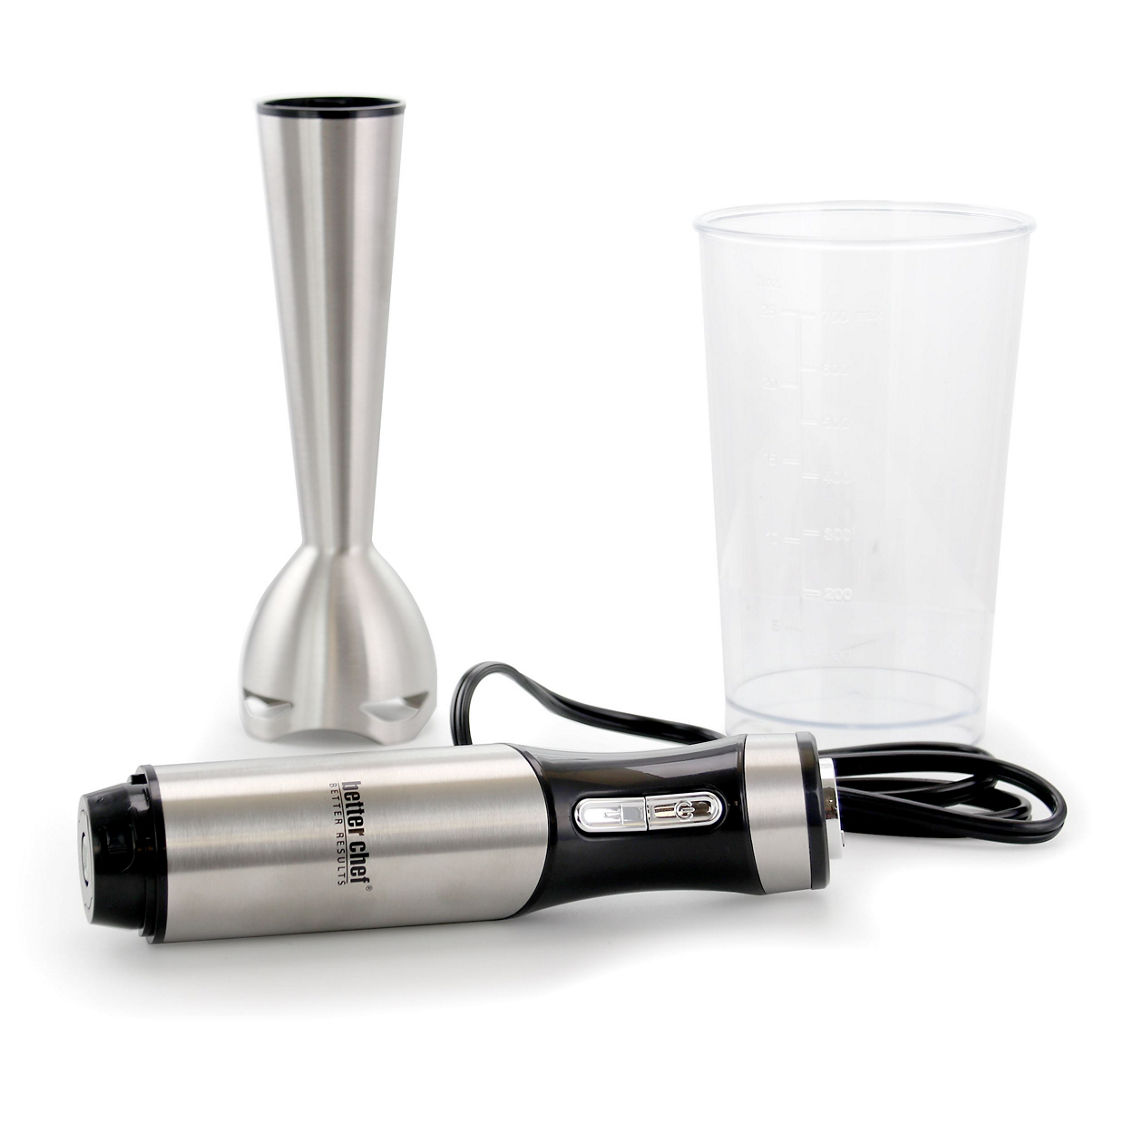 Better Chef Immersion Blender in Silver - Image 4 of 4